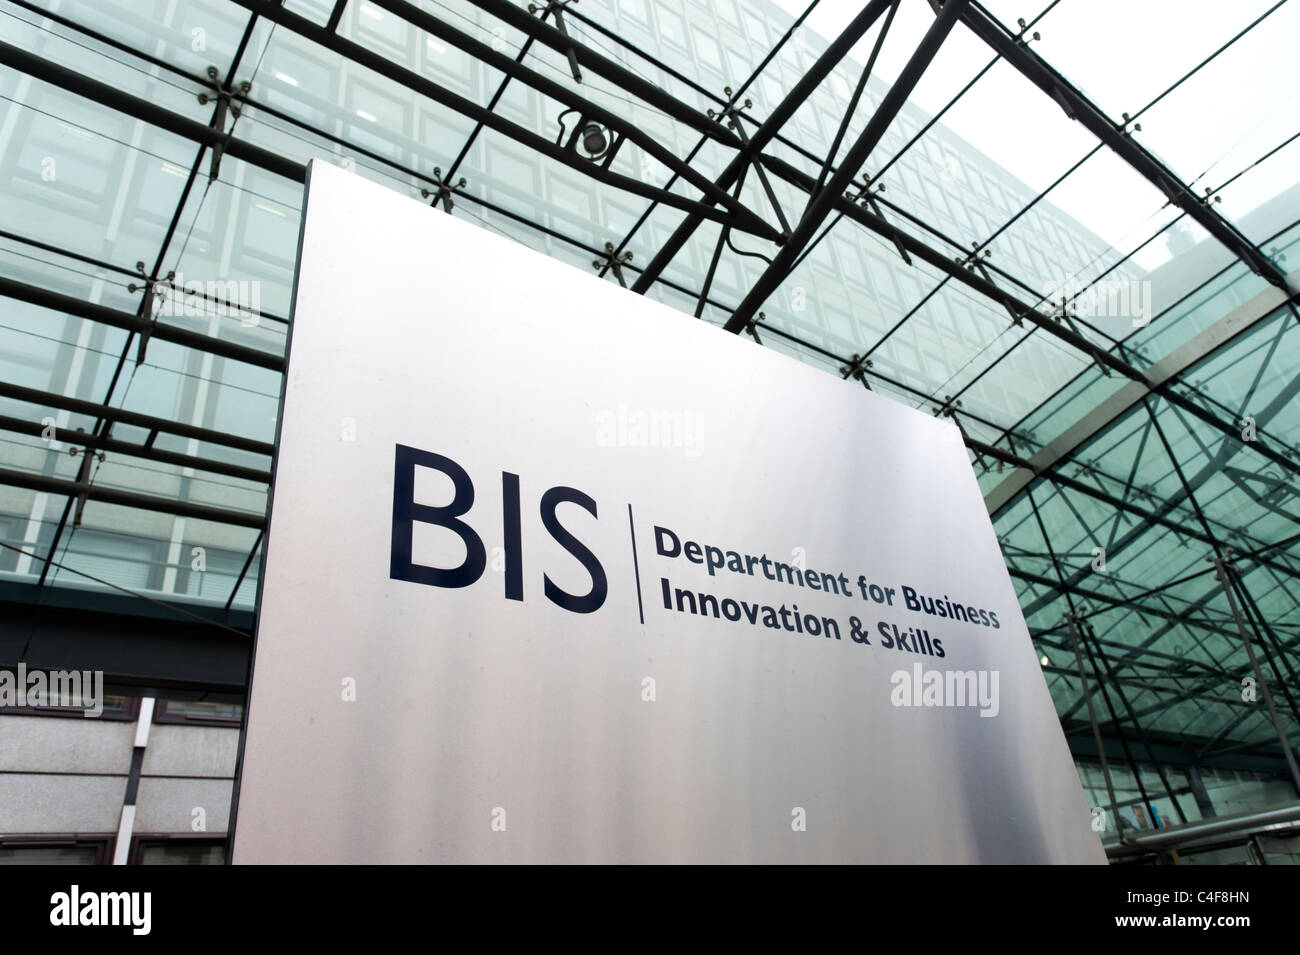 Department for Business Innovation and Skills, London, UK Stockfoto